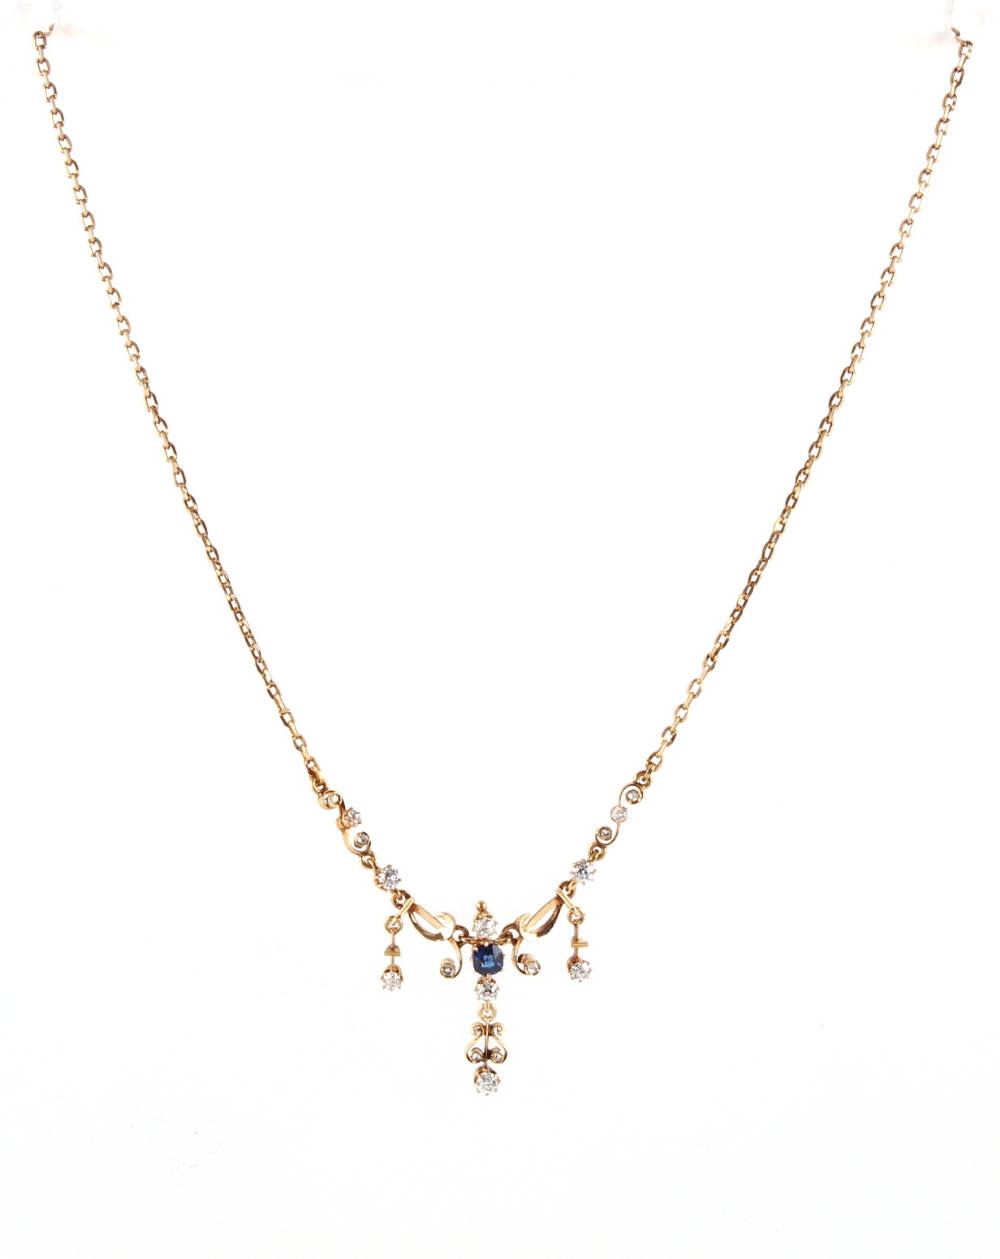 An unmarked yellow gold sapphire & diamond necklace, with chain extension, 16.4ins. (41.5cms.) long. - Image 2 of 2